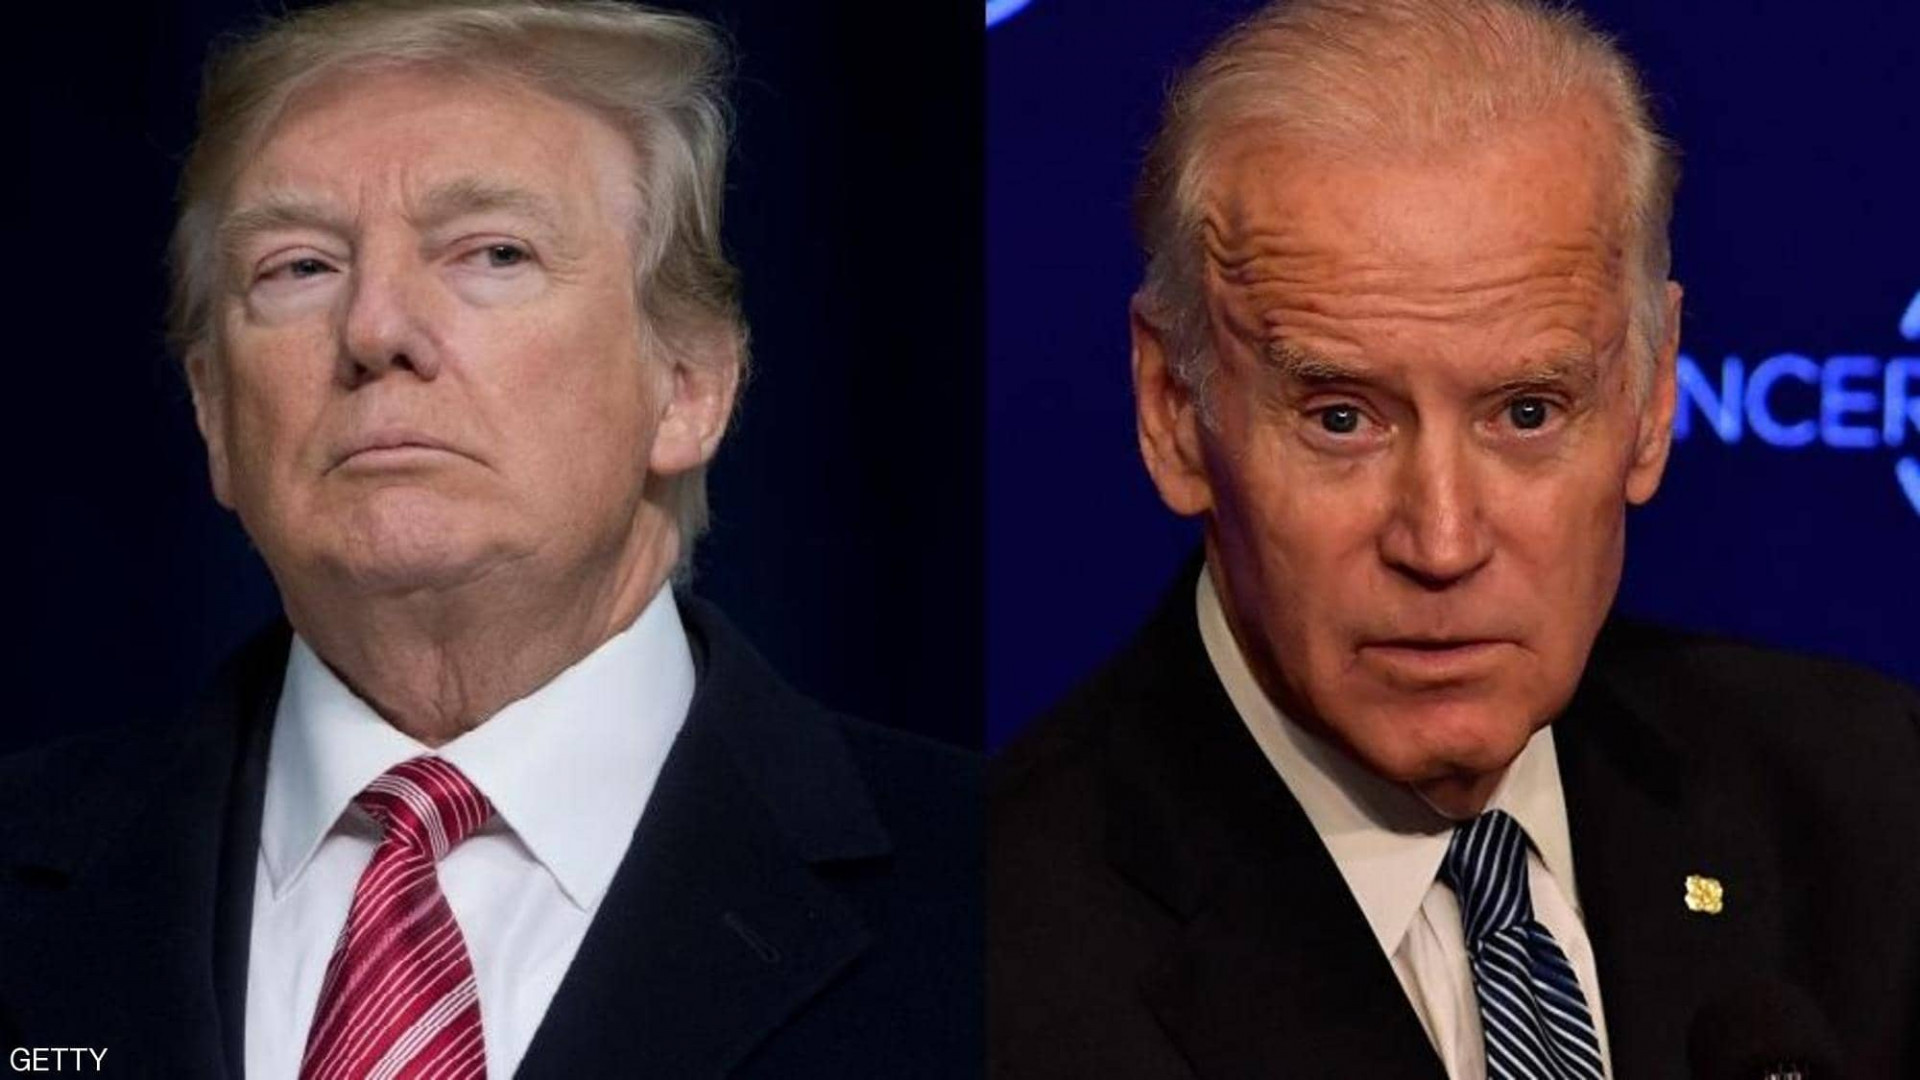 US State Department is preventing Biden from accessing messages from foreign leaders